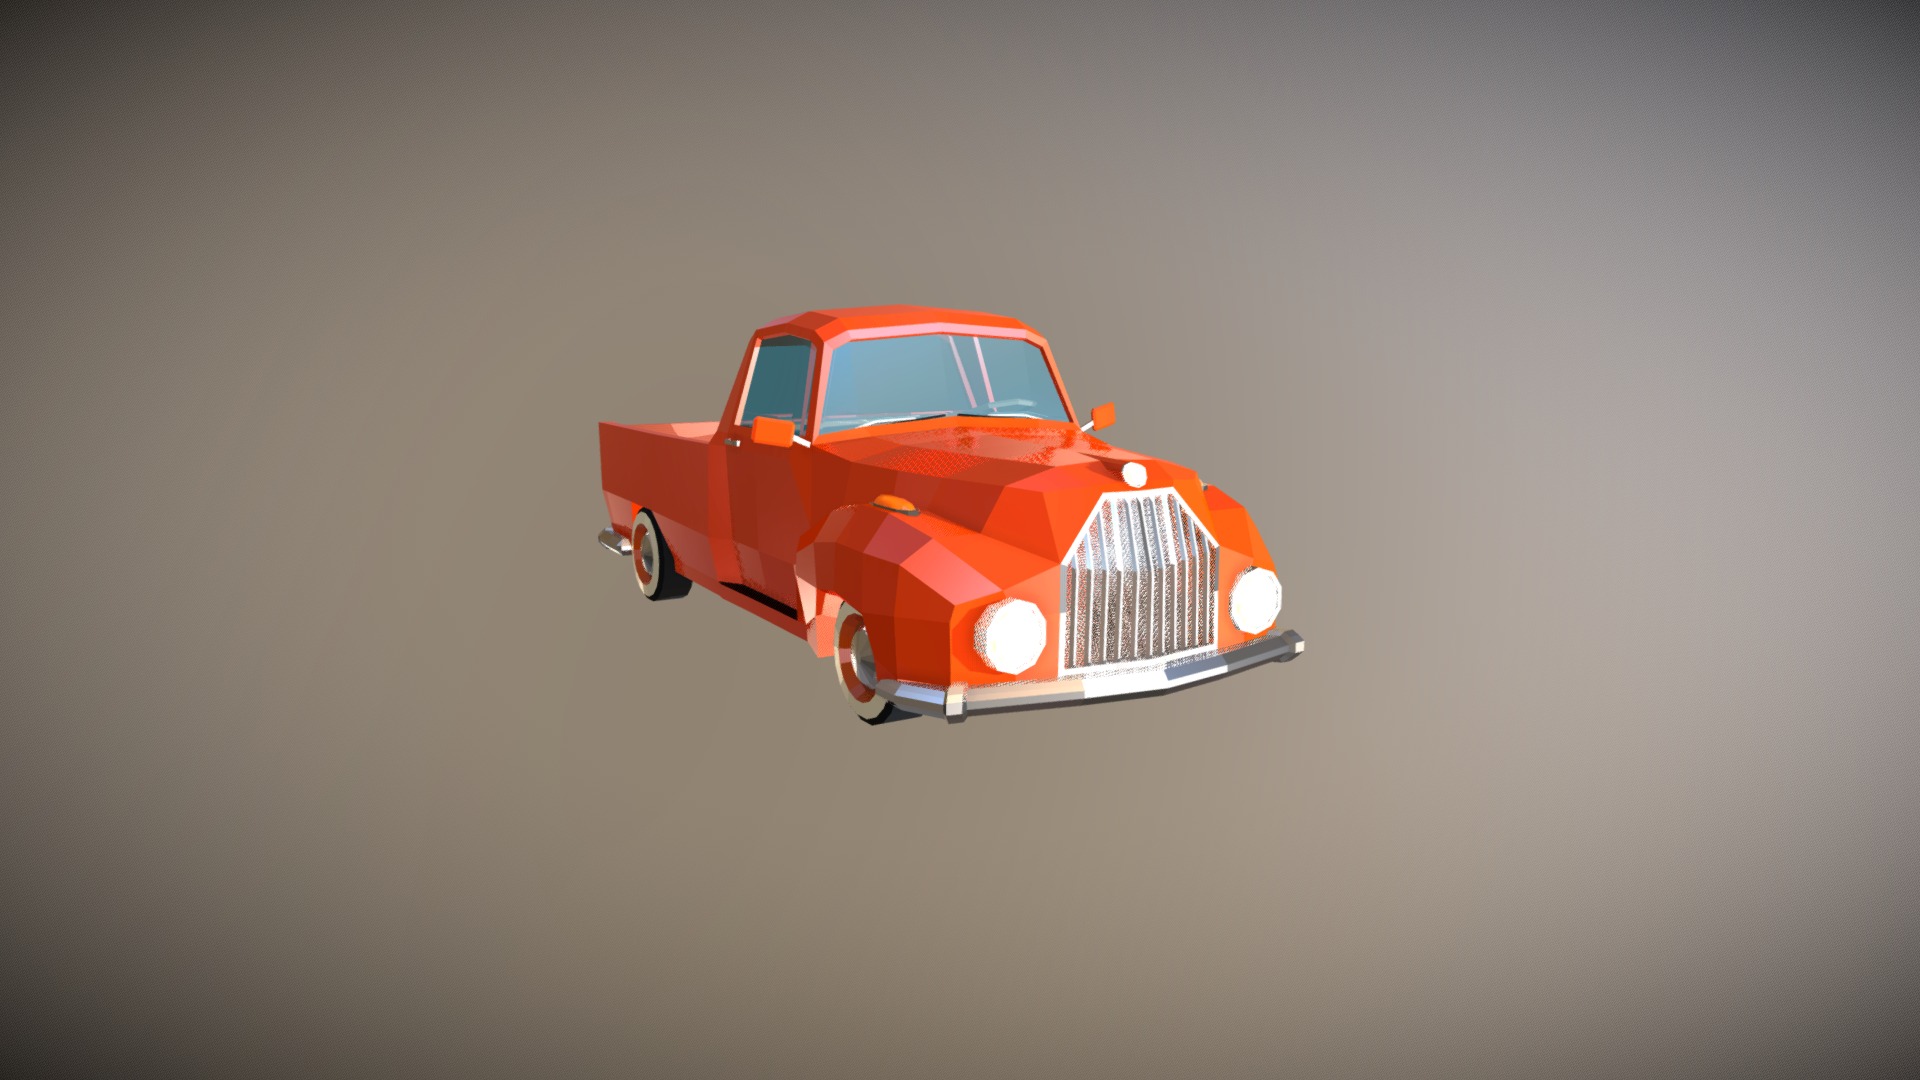 3D model Low Poly Pickup Truck - This is a 3D model of the Low Poly Pickup Truck. The 3D model is about an orange car with a white background.